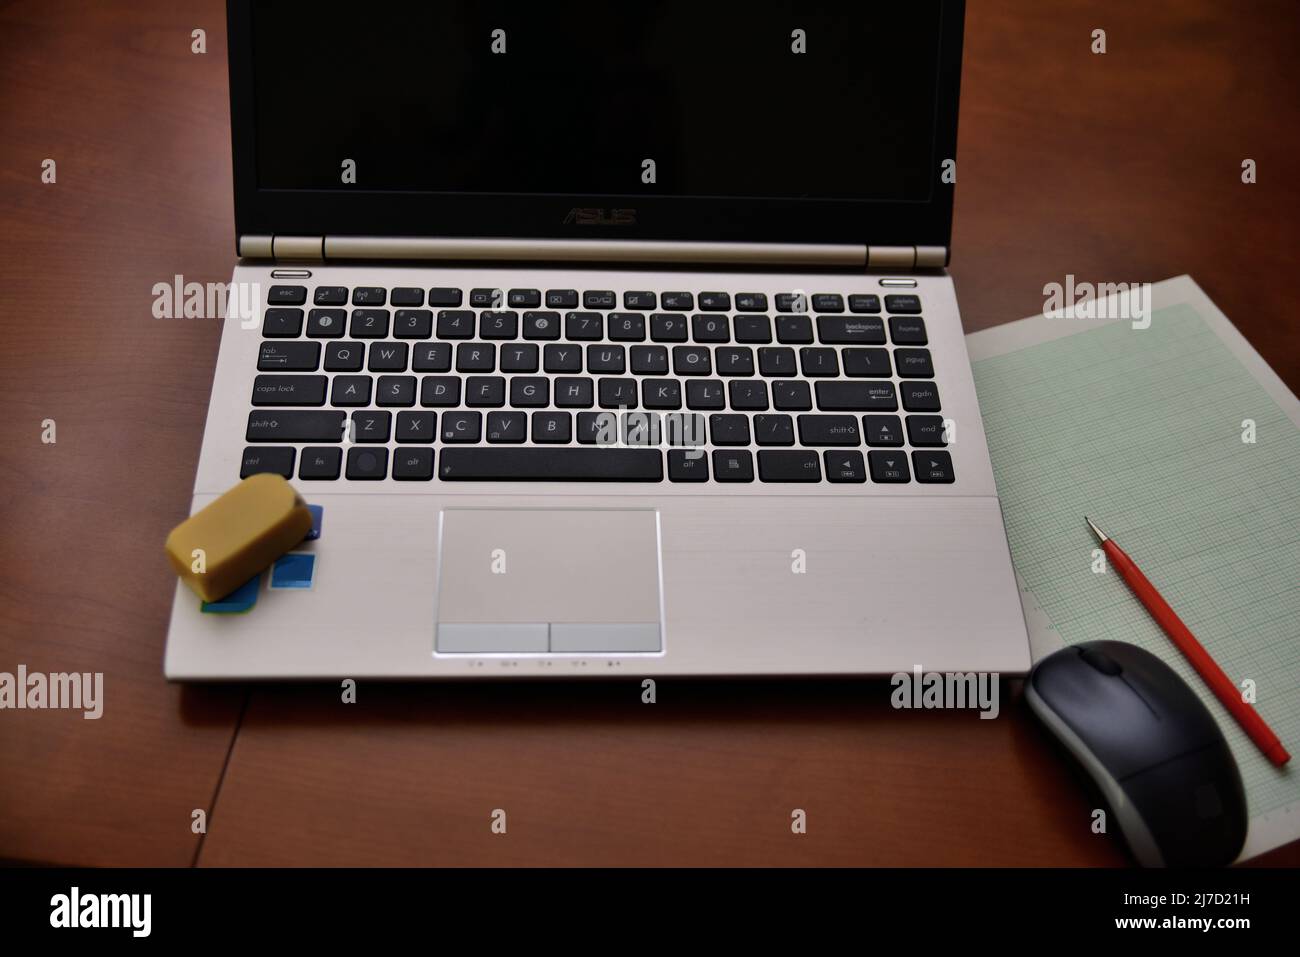 Laptop computer on a desk in a home office.with pencil and paper arranged for note taking. Eraser, too. Stock Photo